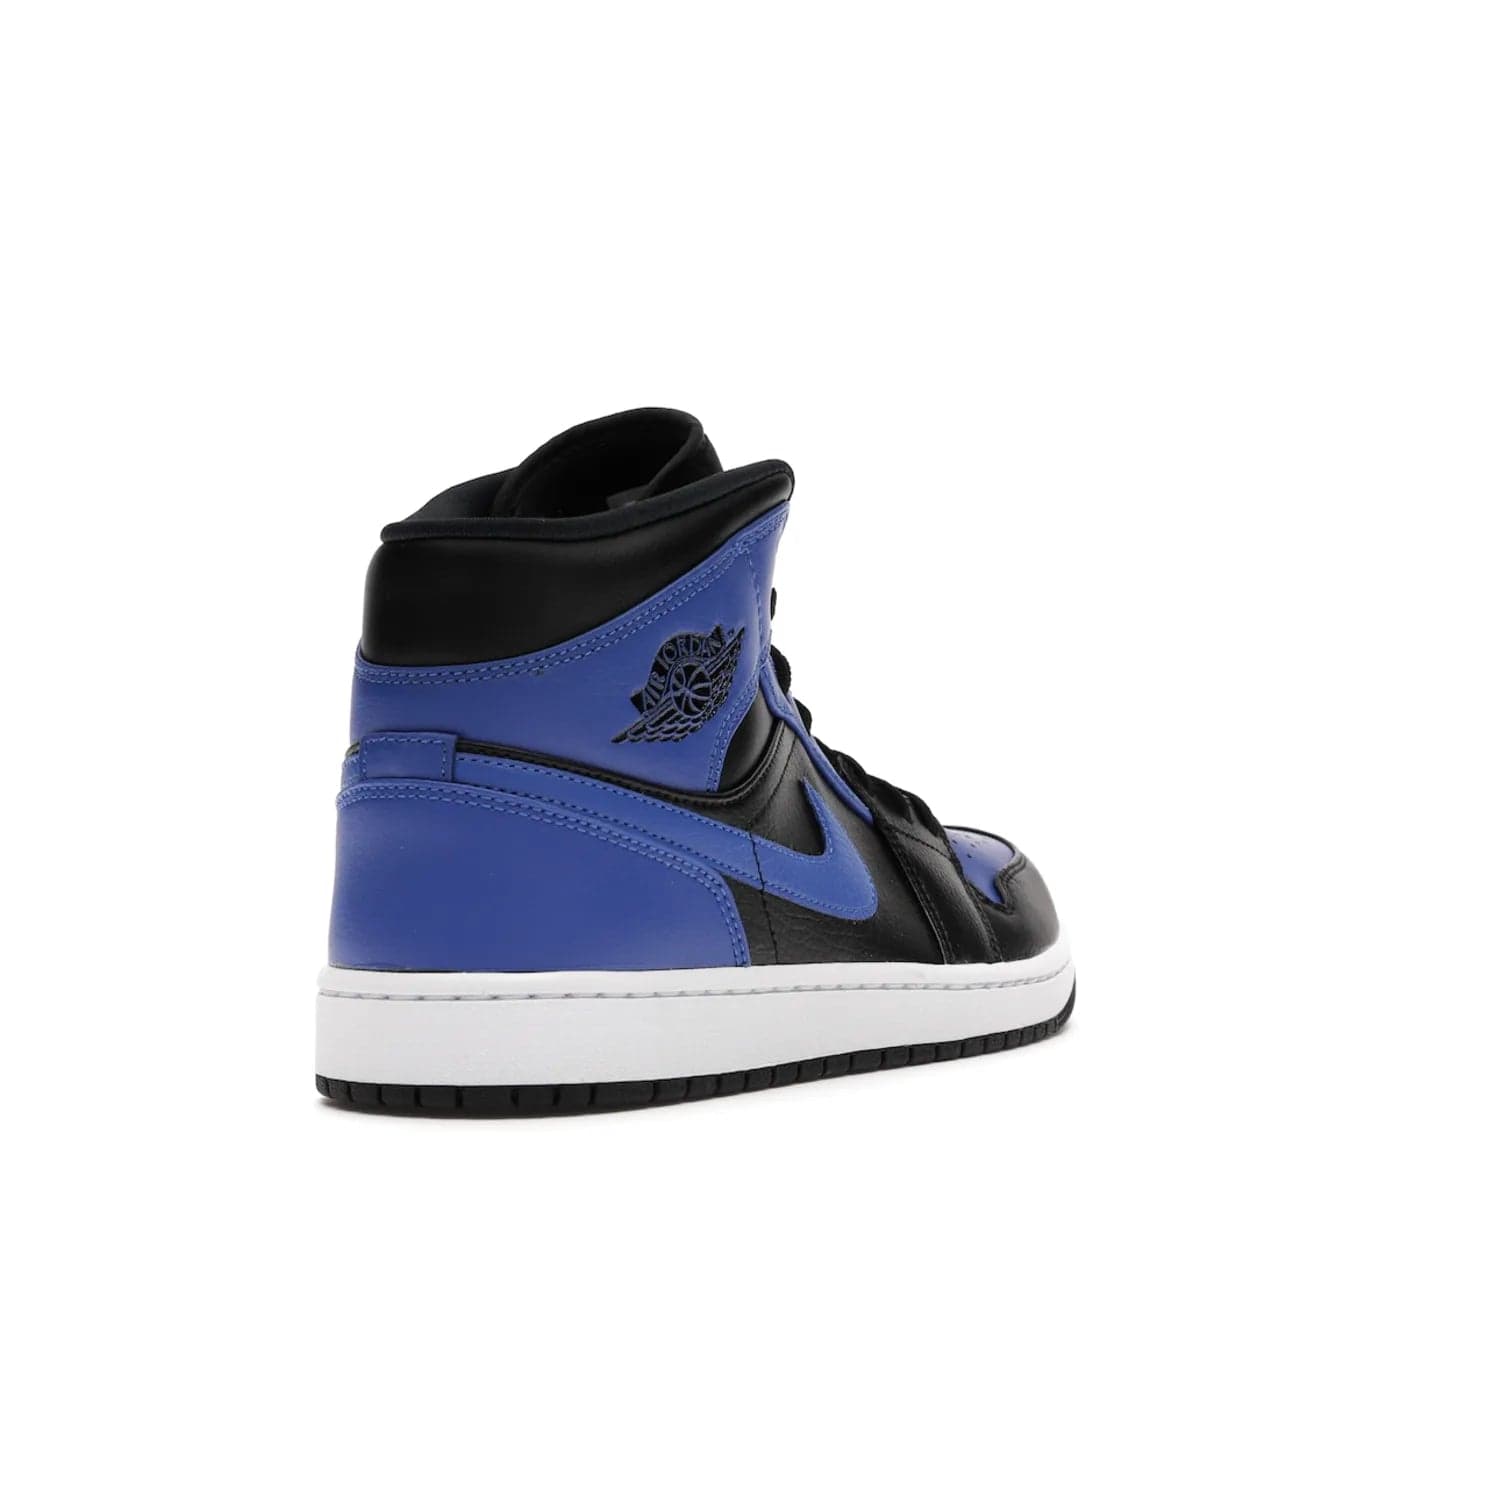 Jordan 1 Mid Hyper Royal Tumbled Leather - Image 31 - Only at www.BallersClubKickz.com - Iconic colorway of the Air Jordan 1 Mid Black Royal Tumbled Leather. Features a black tumbled leather upper, royal blue leather overlays, white midsole & black rubber outsole. Released December 2020. Adds premium style to any collection.